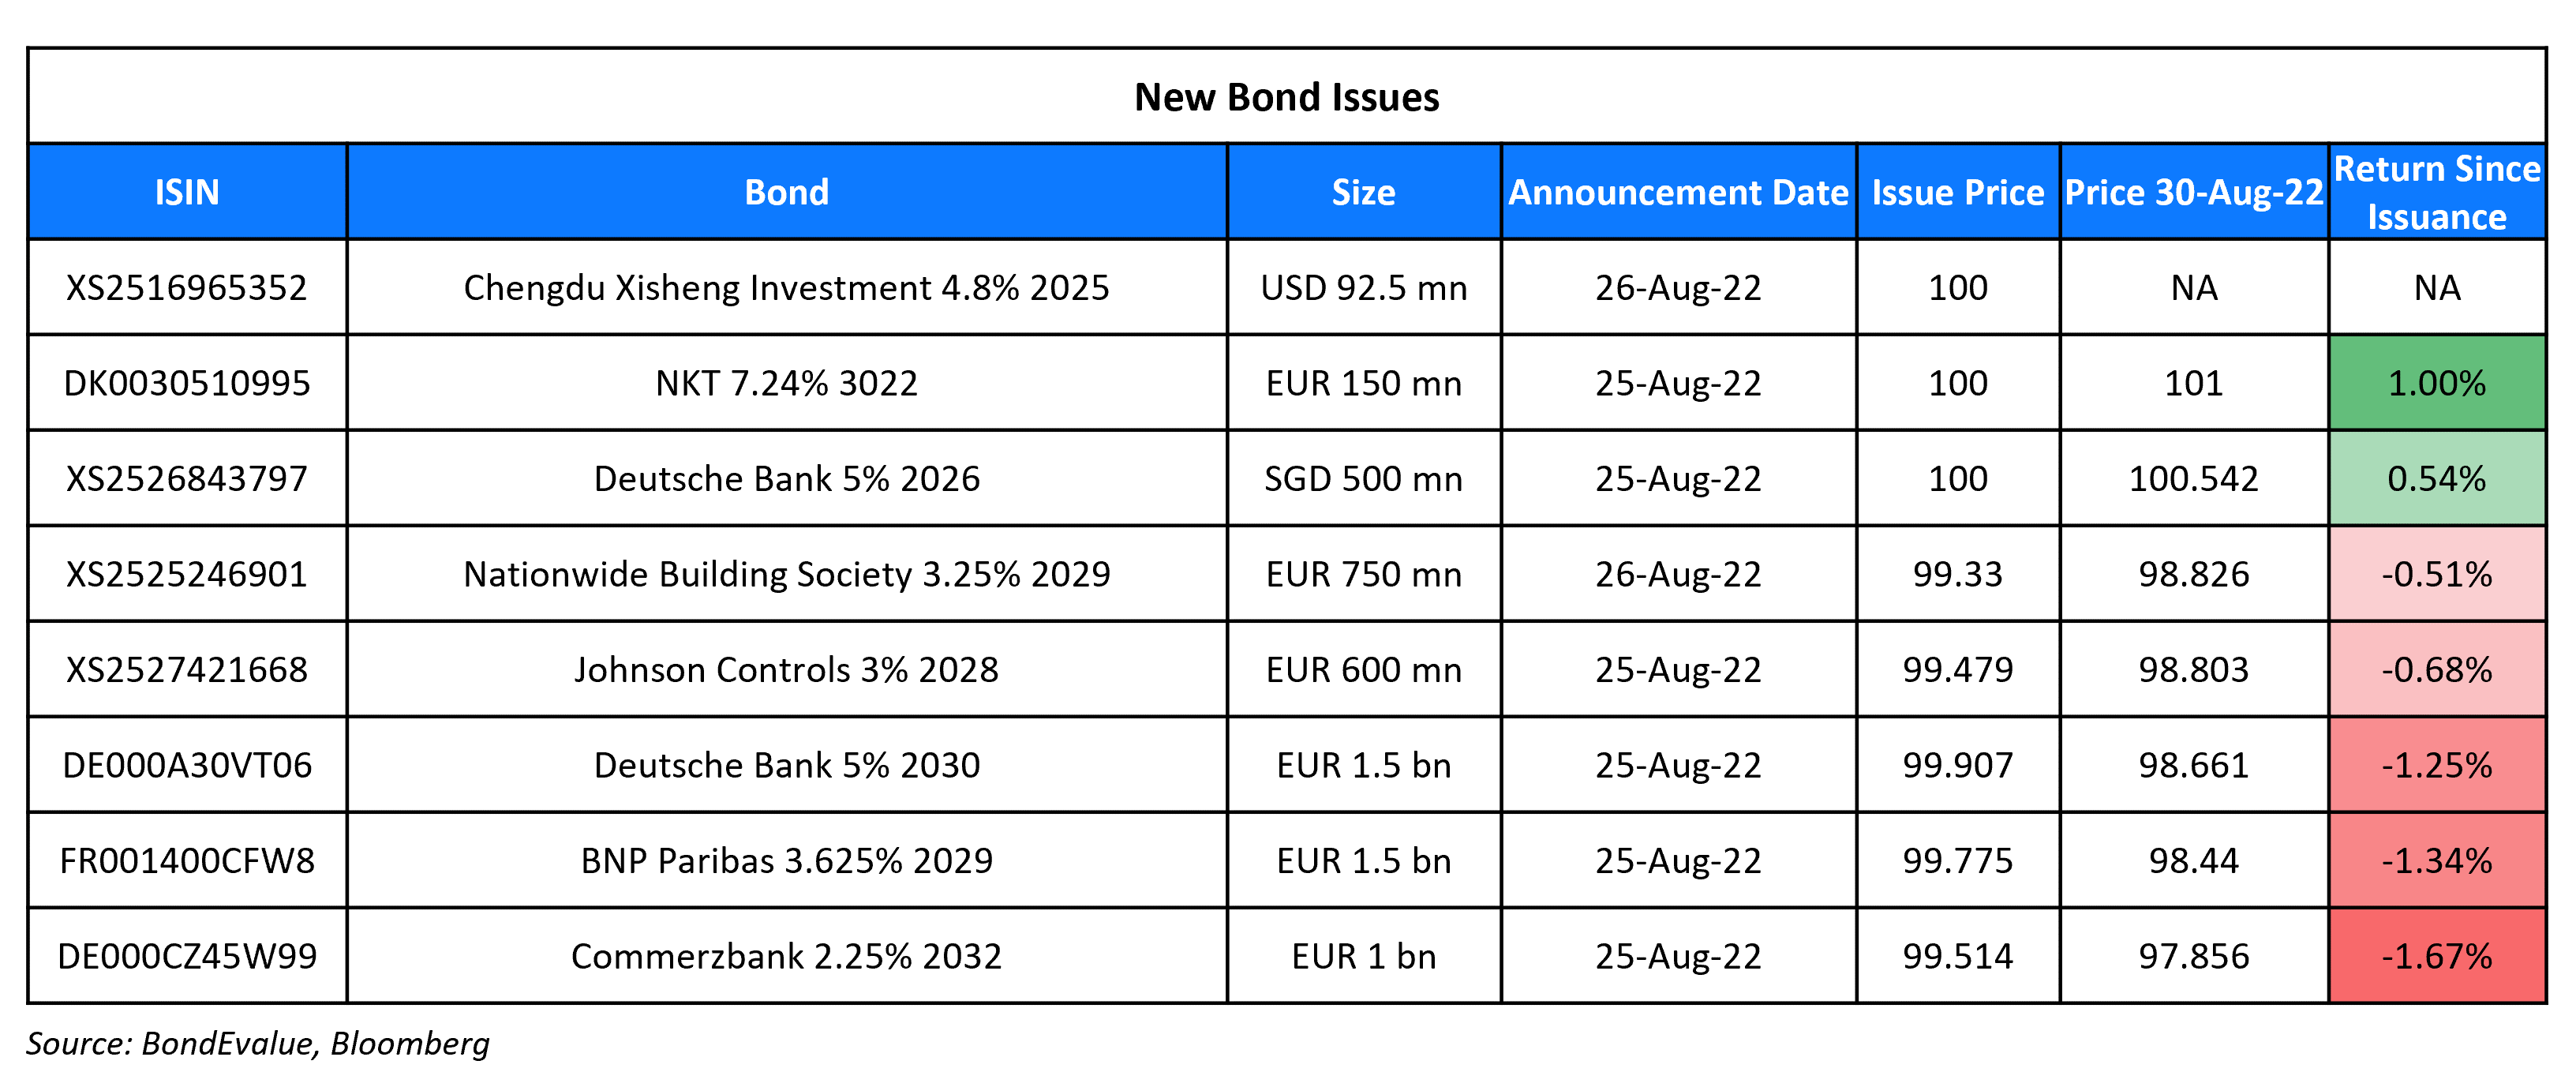 New Bond Issues 30 Aug 22